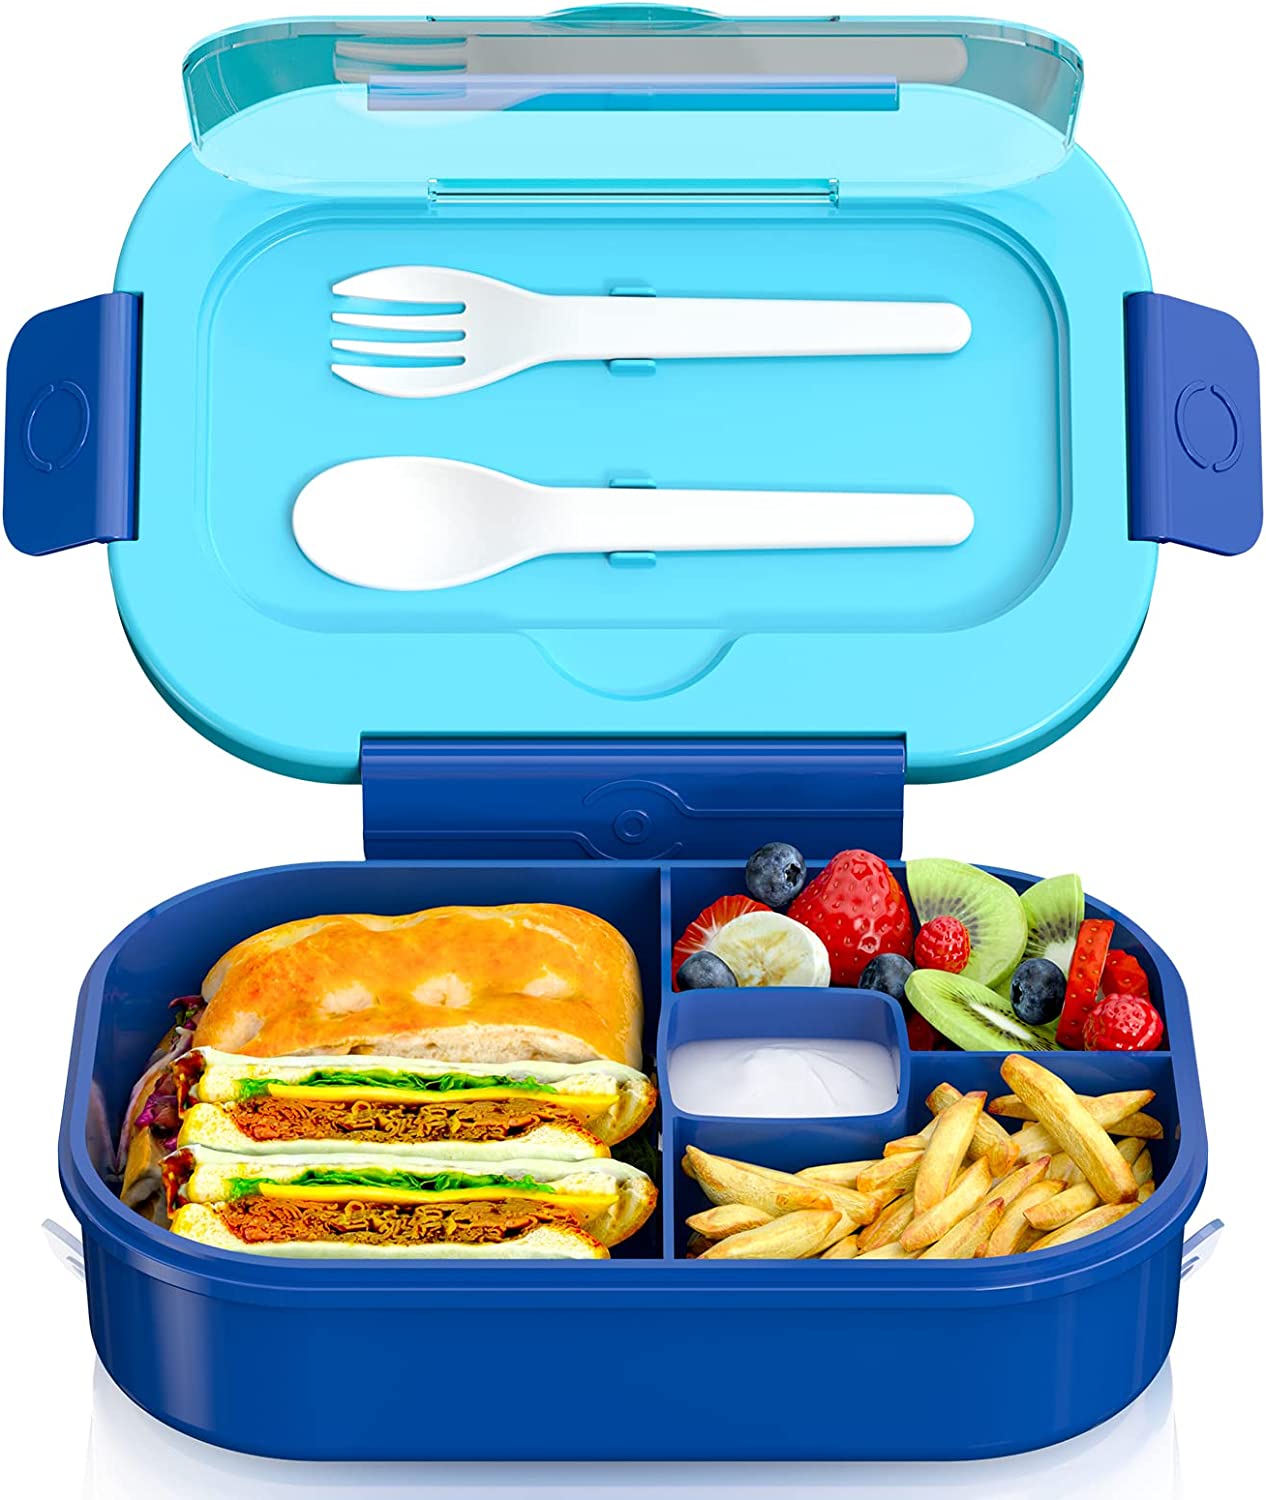 Lowest Price: 4 Compartment Bento Box, Leak Proof,  Microwave/Dishwasher/Refrigerator Safe, BPA Free (Wheat Blue)